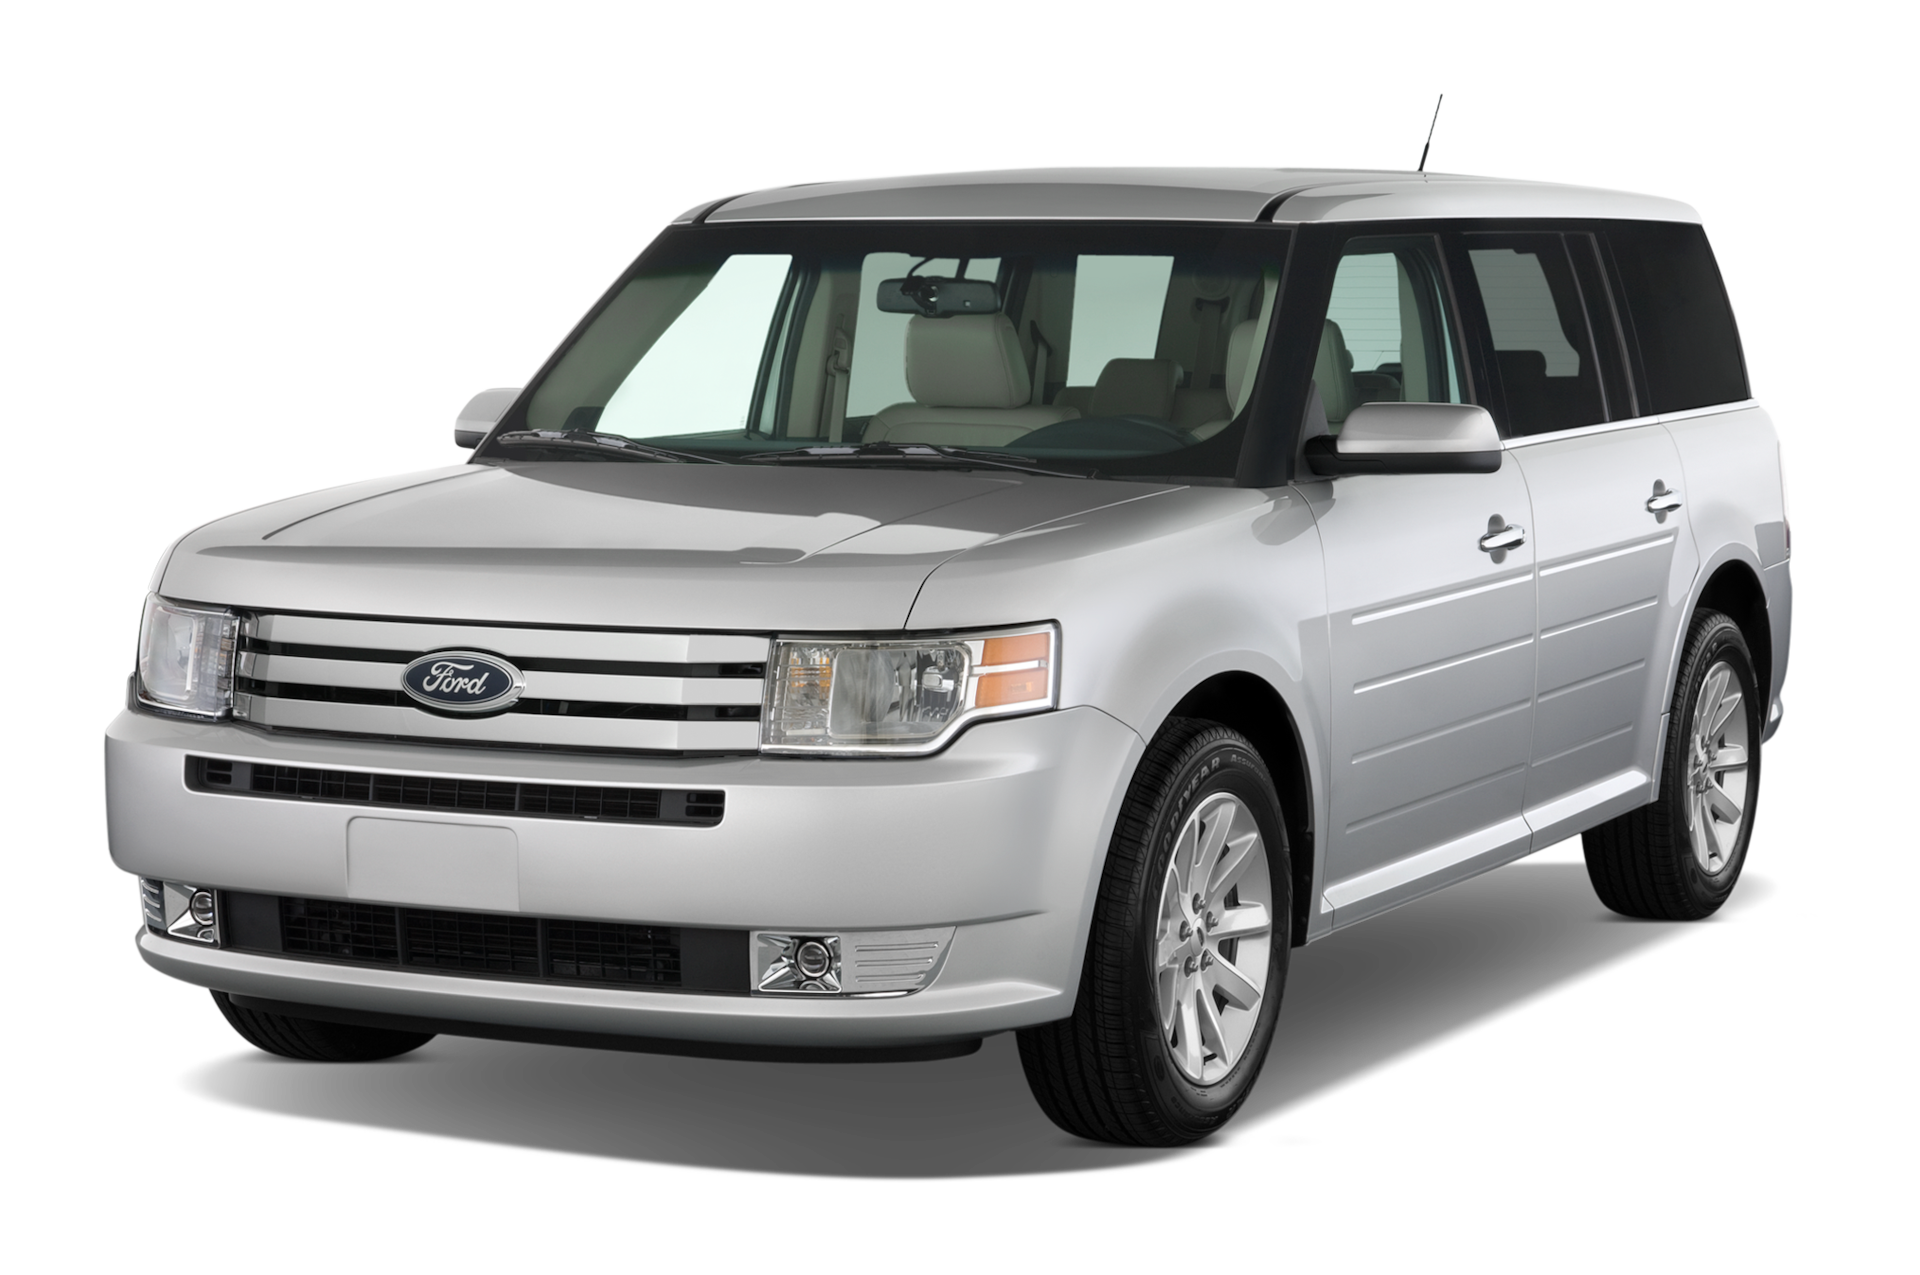 2012 Ford Flex Prices, Reviews, and Photos - MotorTrend